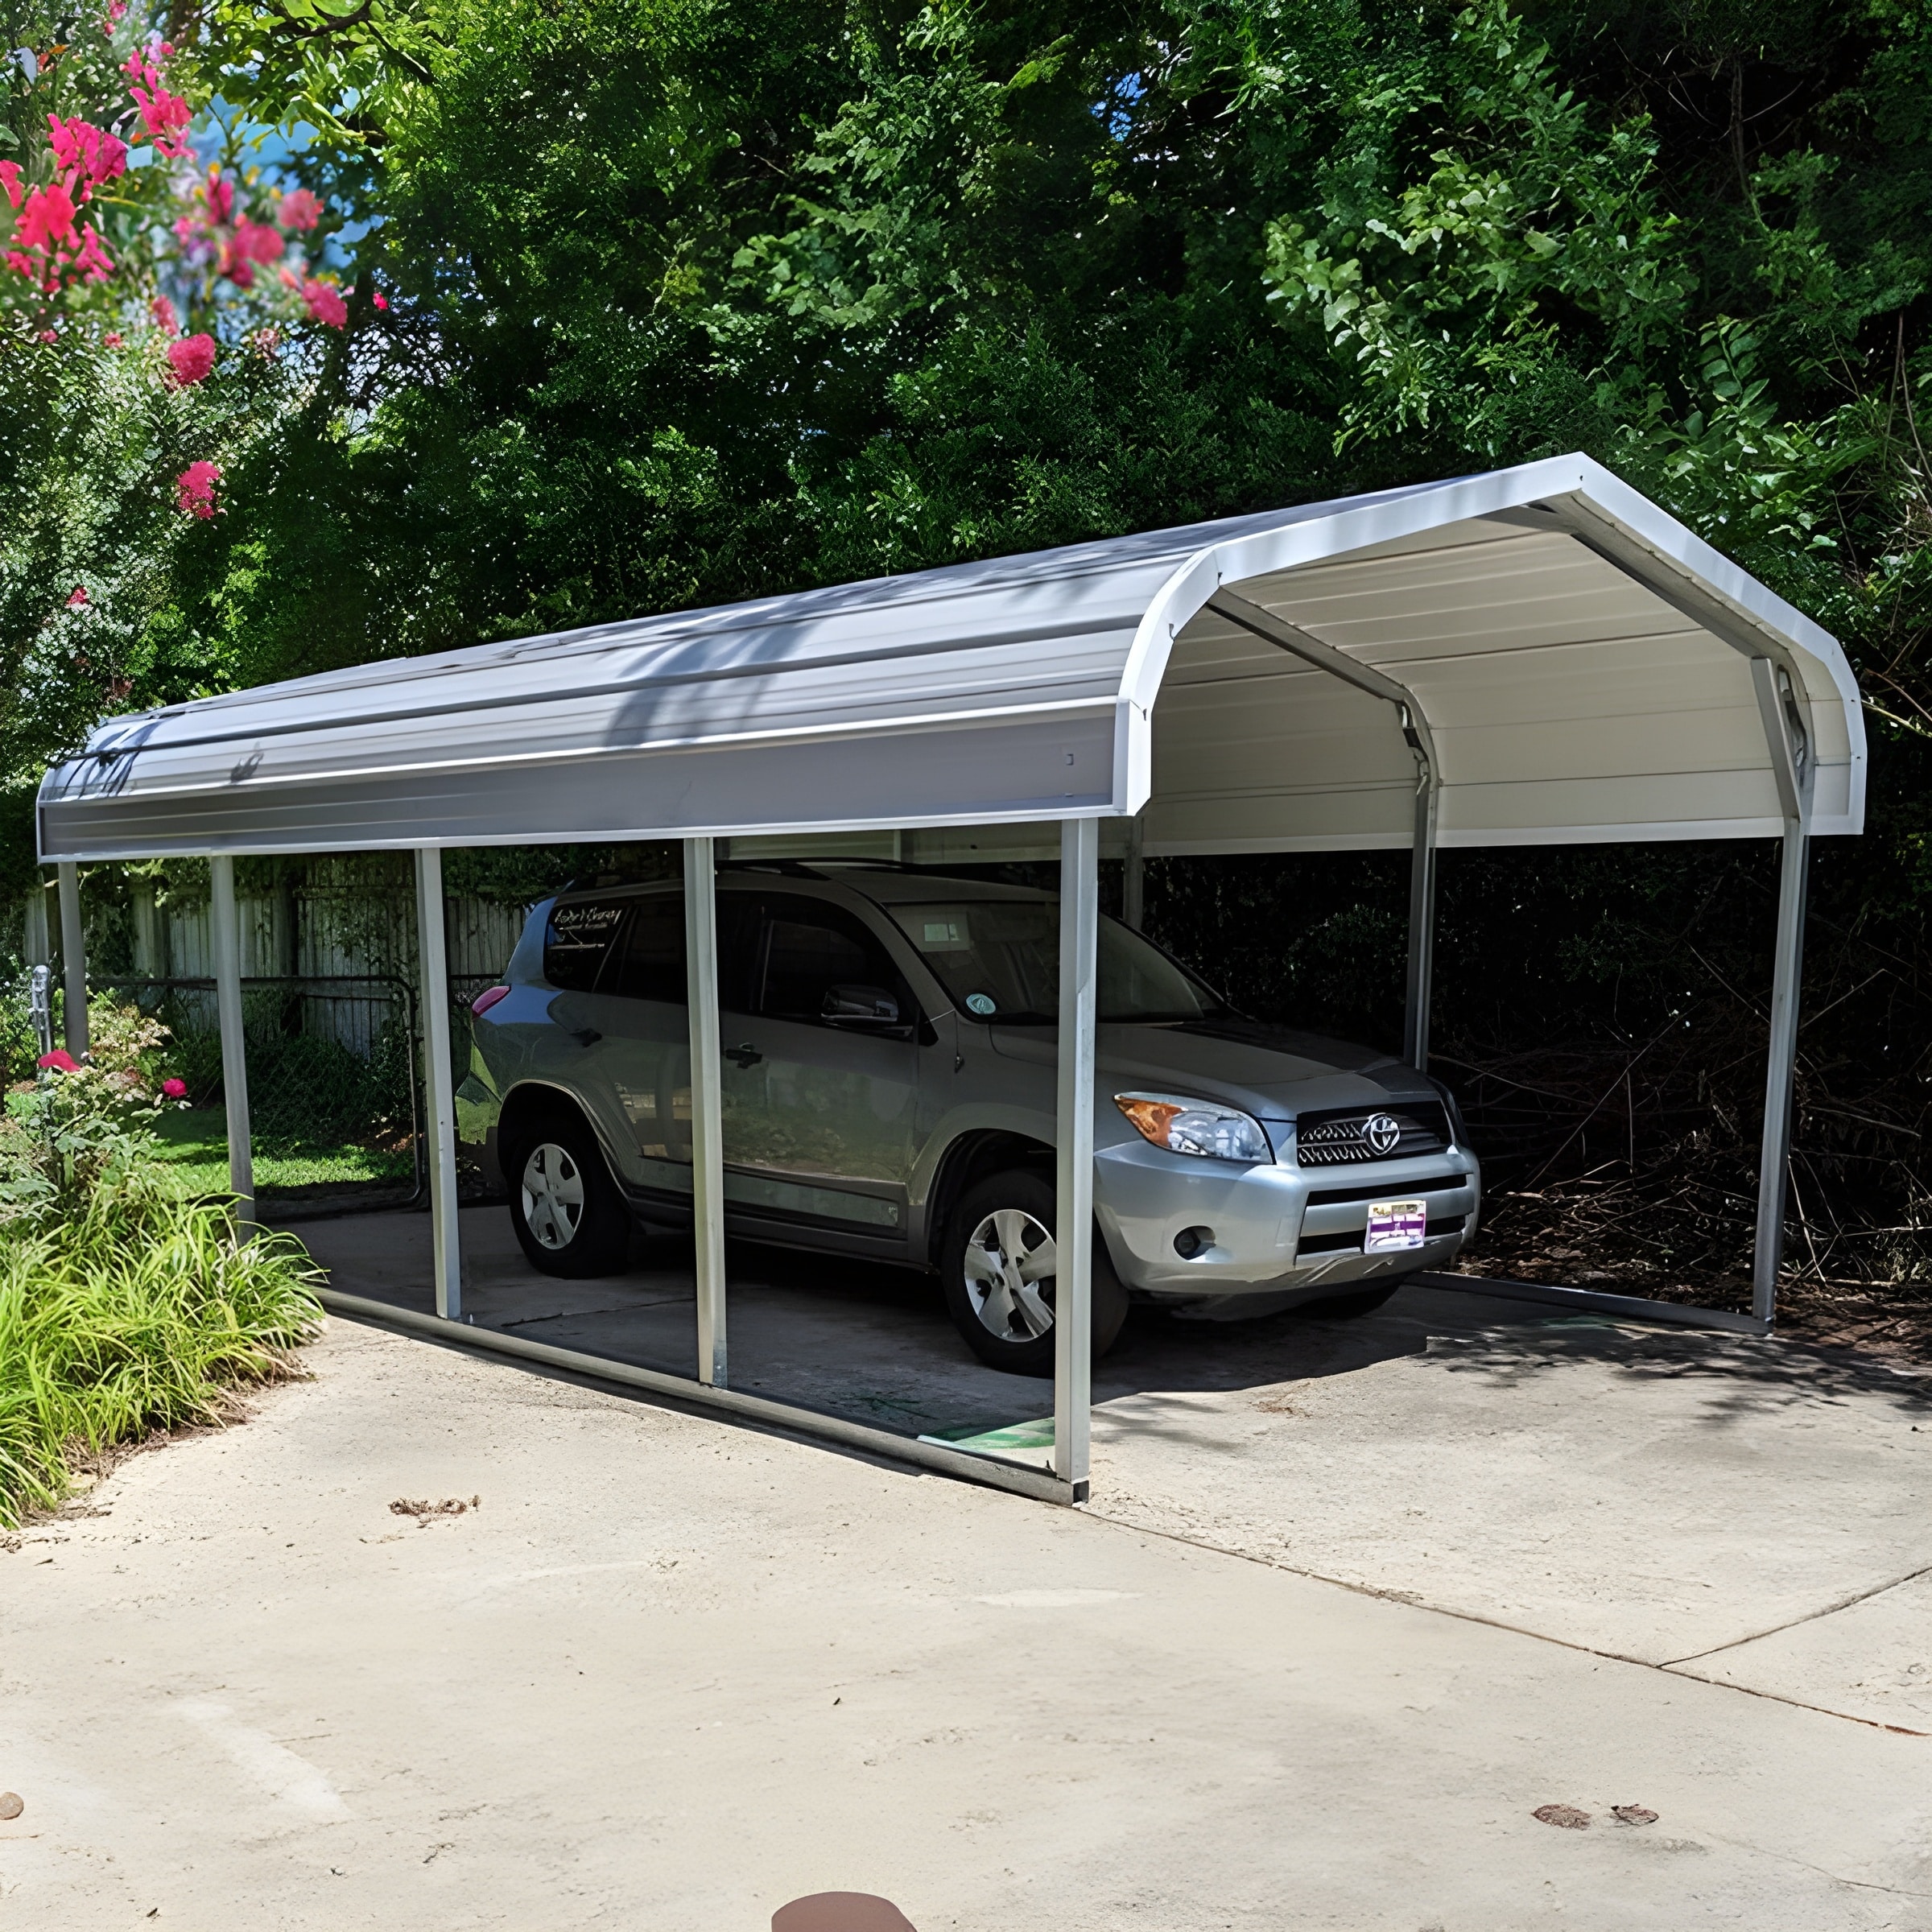 A sturdy metal carport made of steel, providing protection for vehicles. The carport is spacious and features a gable roof design. It is set against a background of a well-maintained driveway and a lush green garden.